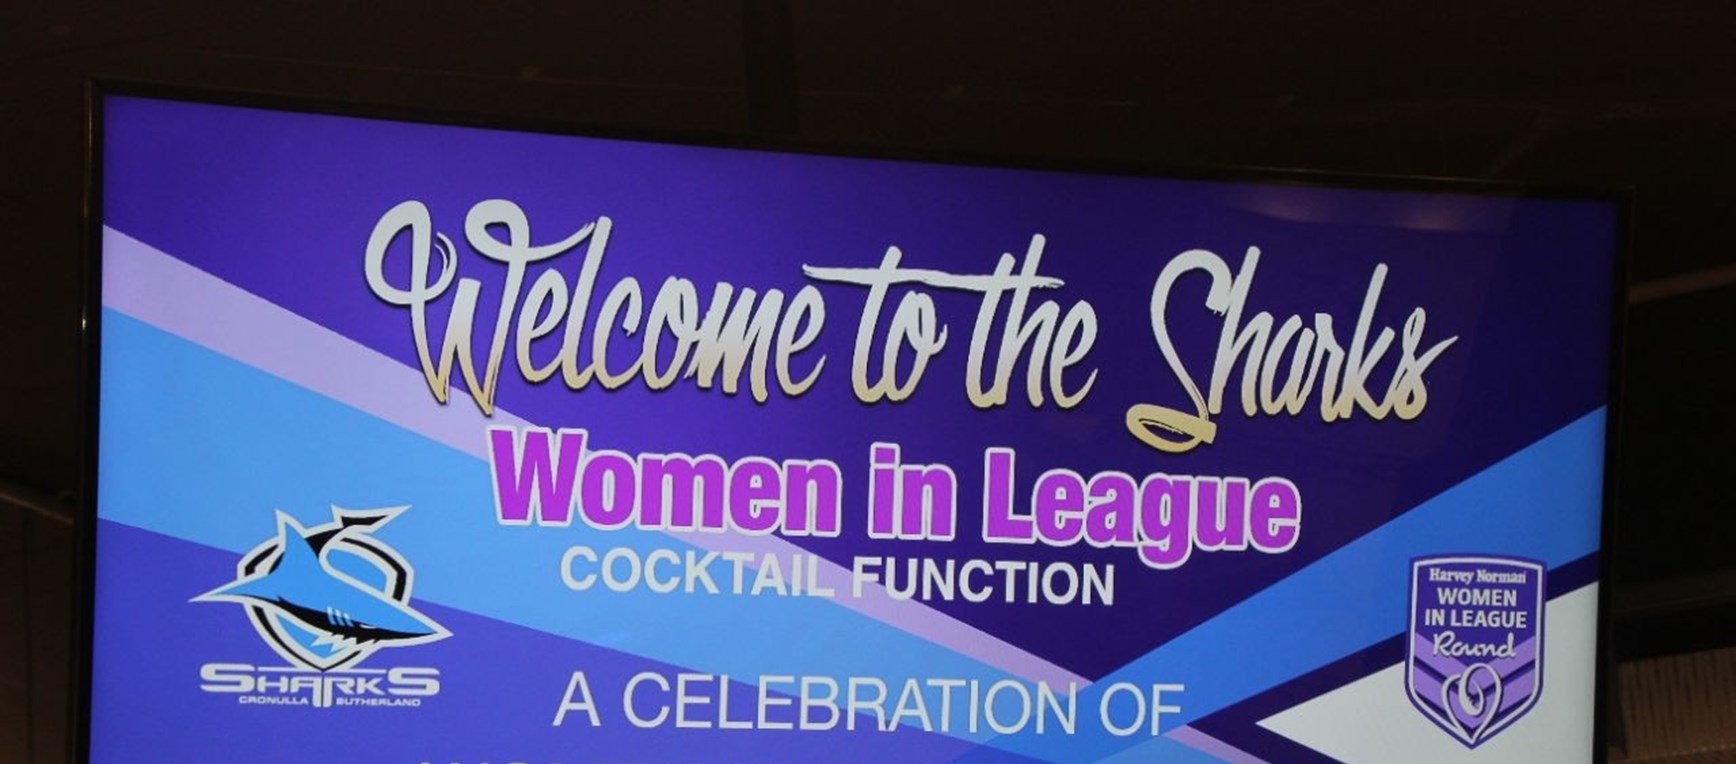 Women in League | Sharks Cocktail Function